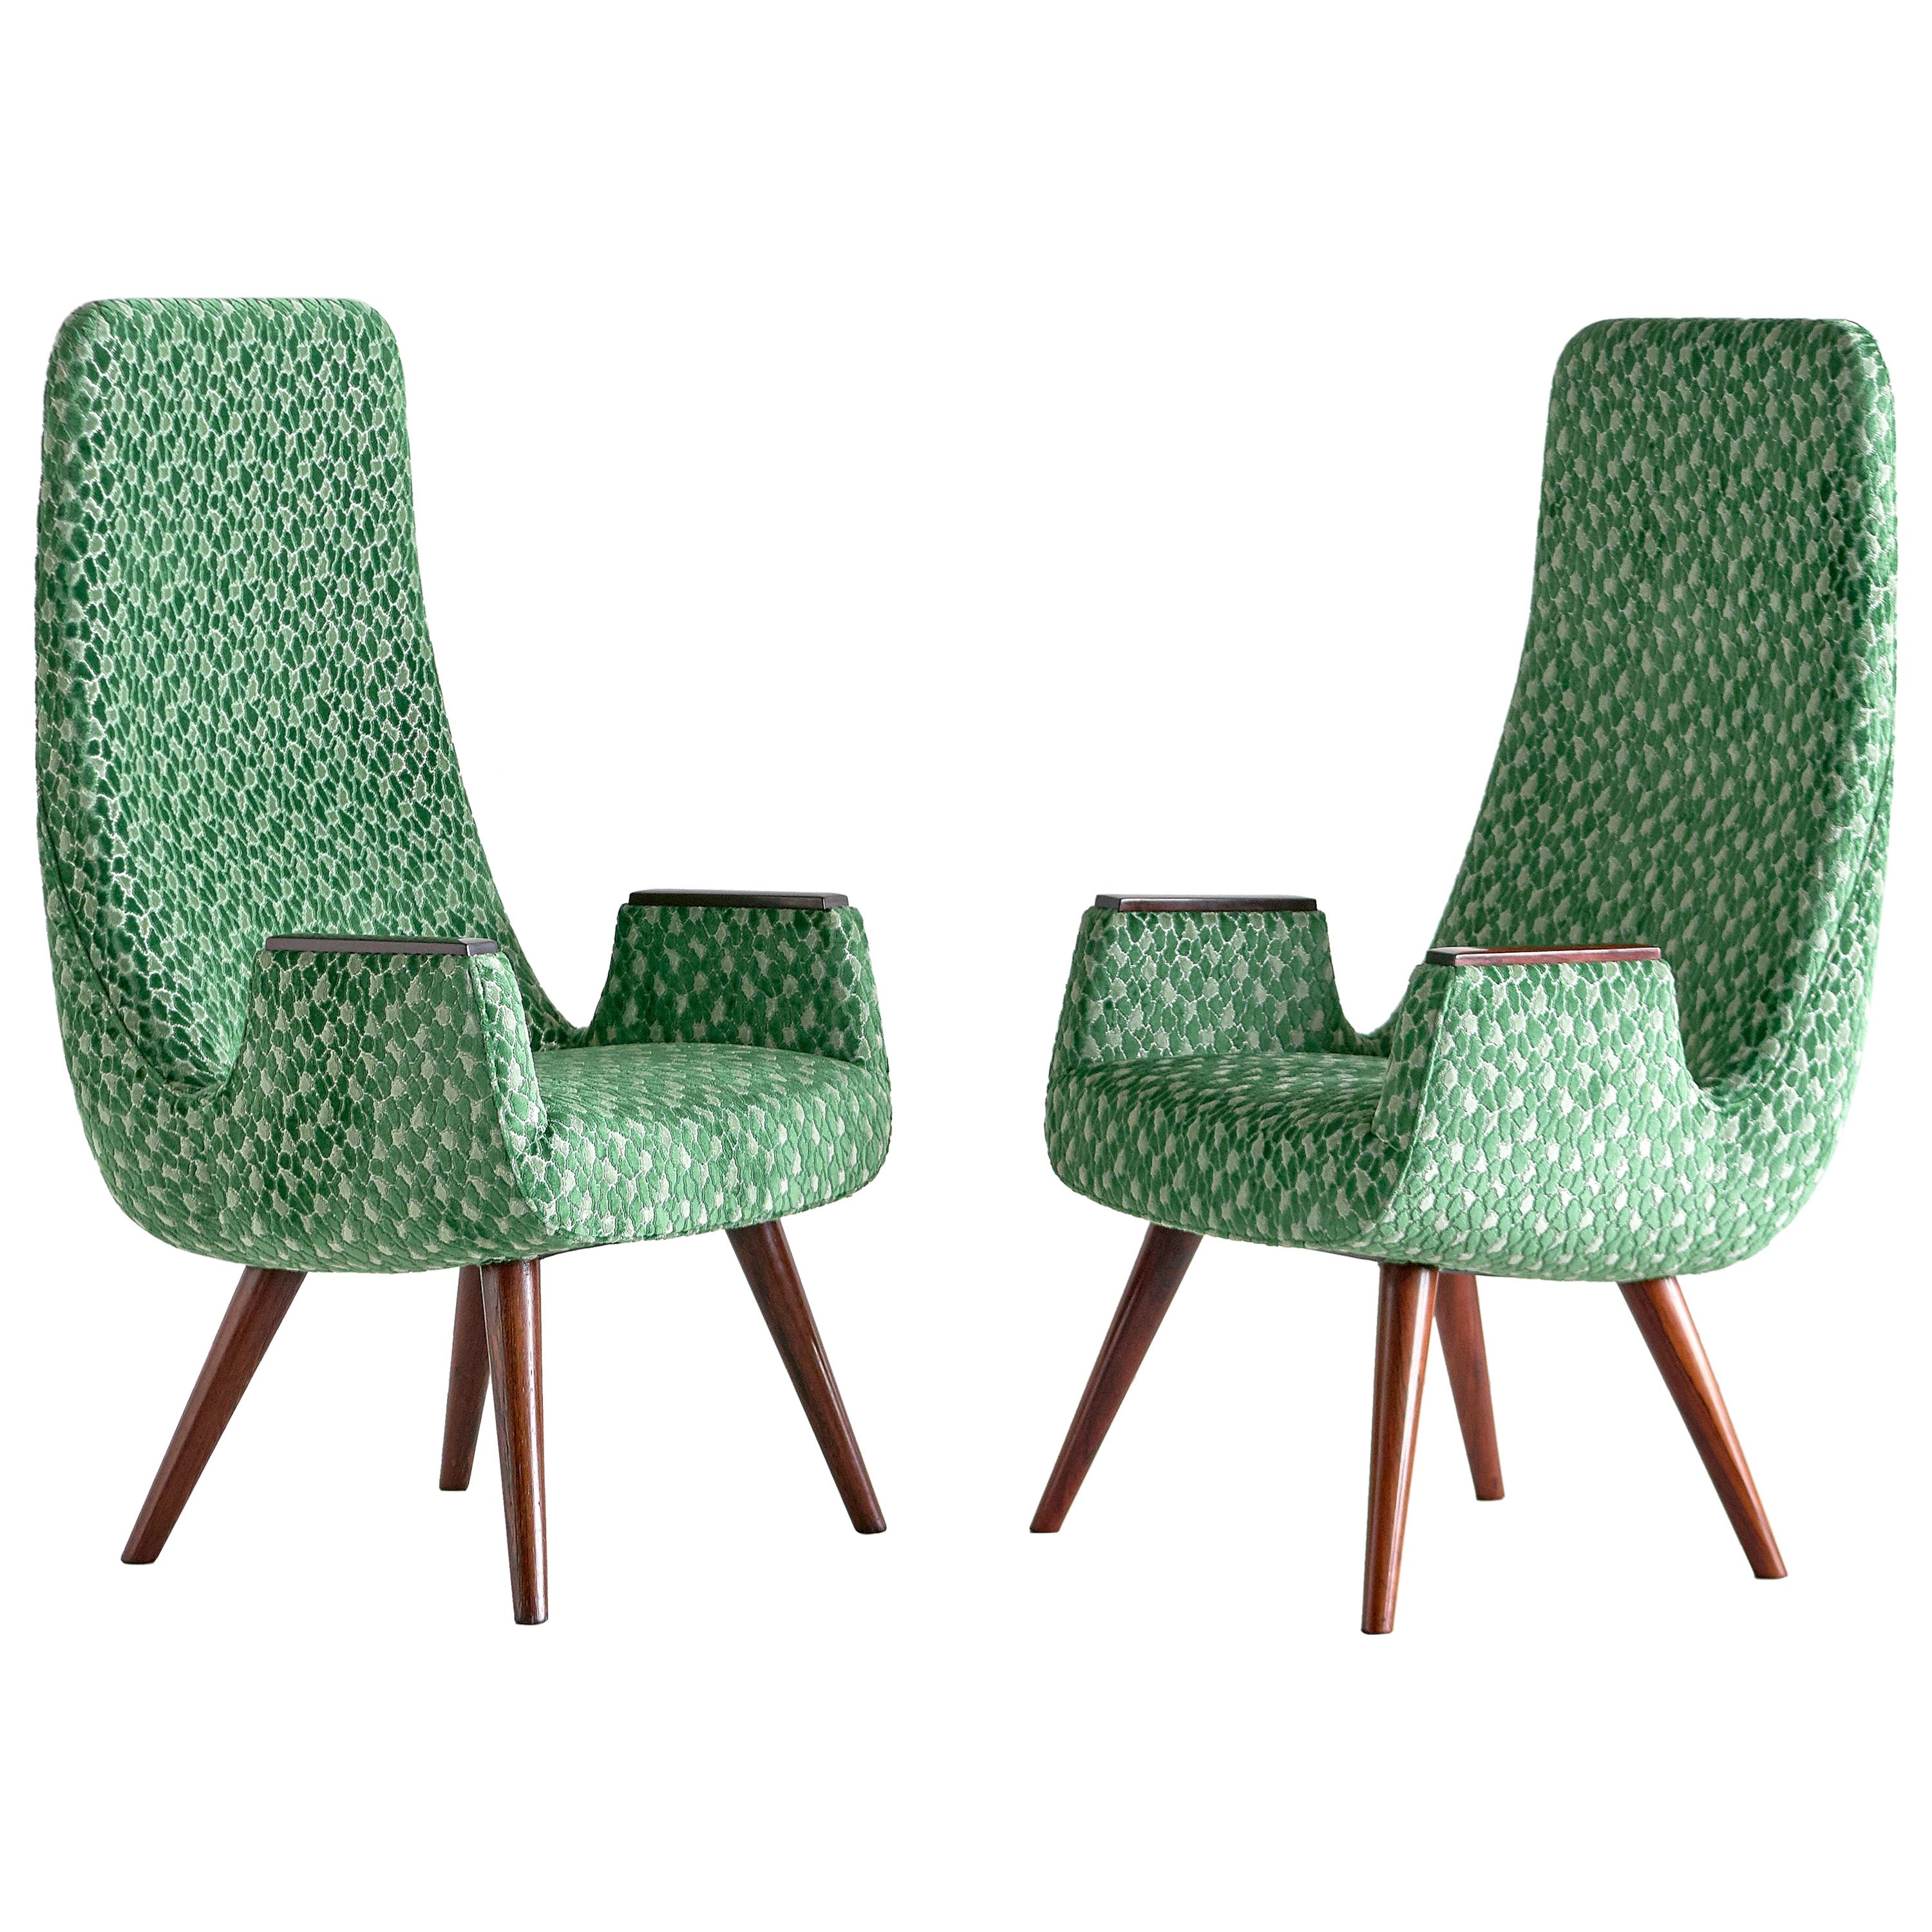 Pair of High Back Armchairs in Green Braquenié Velvet and Wengé Wood, 1950s